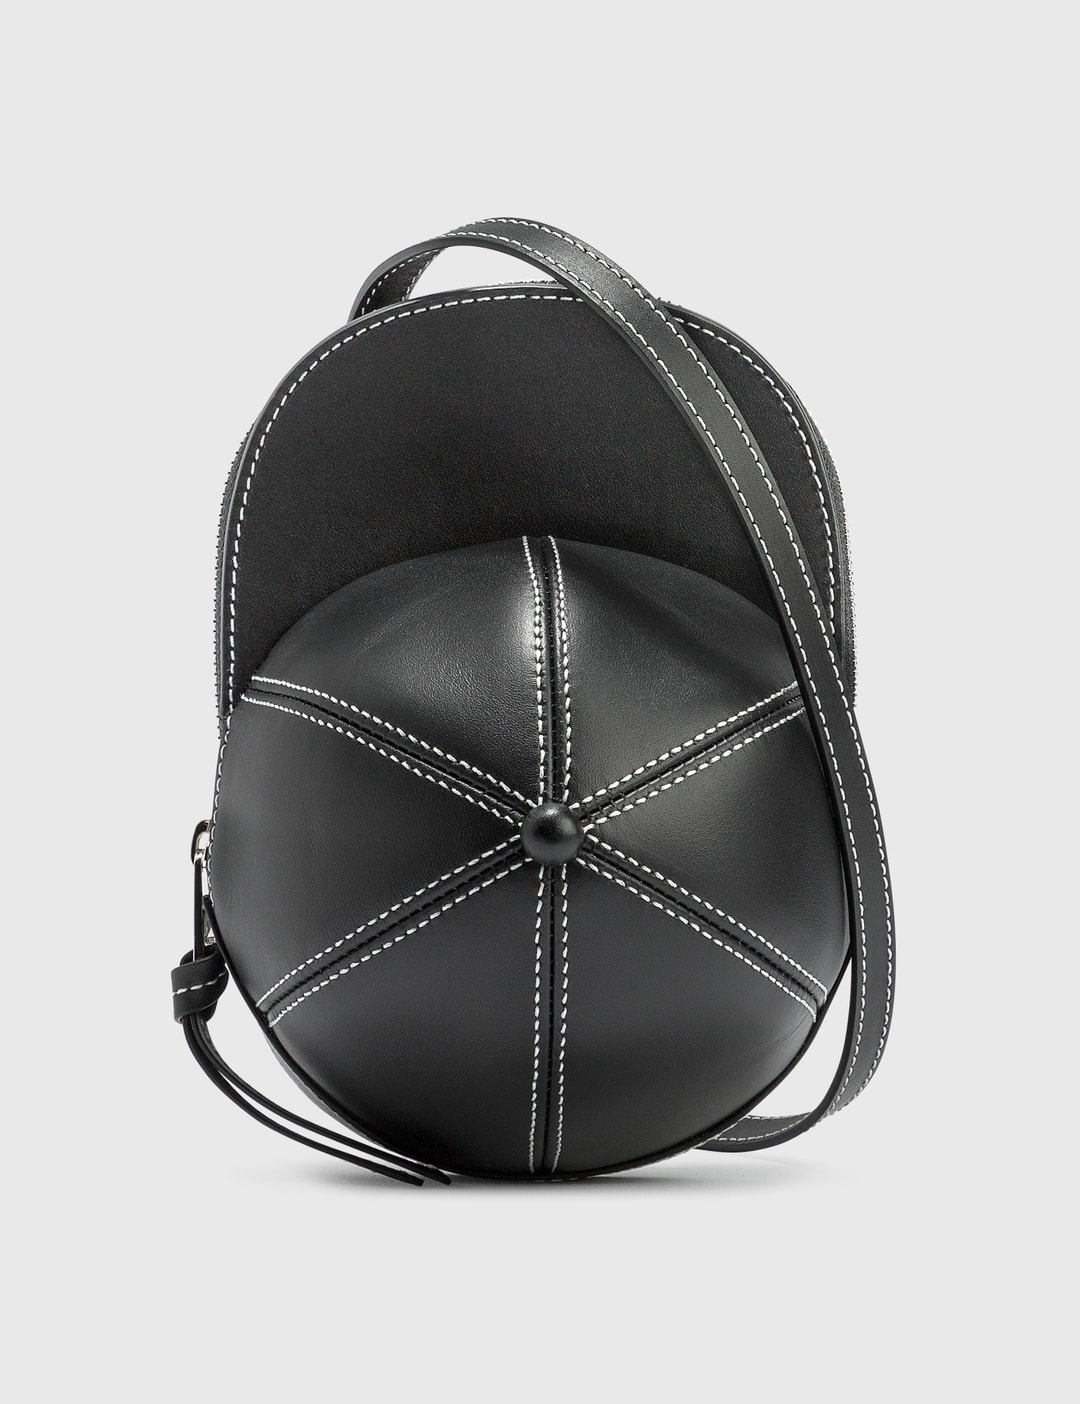 JW Anderson - Mini Cap Bag | HBX - Globally Curated Fashion and ...